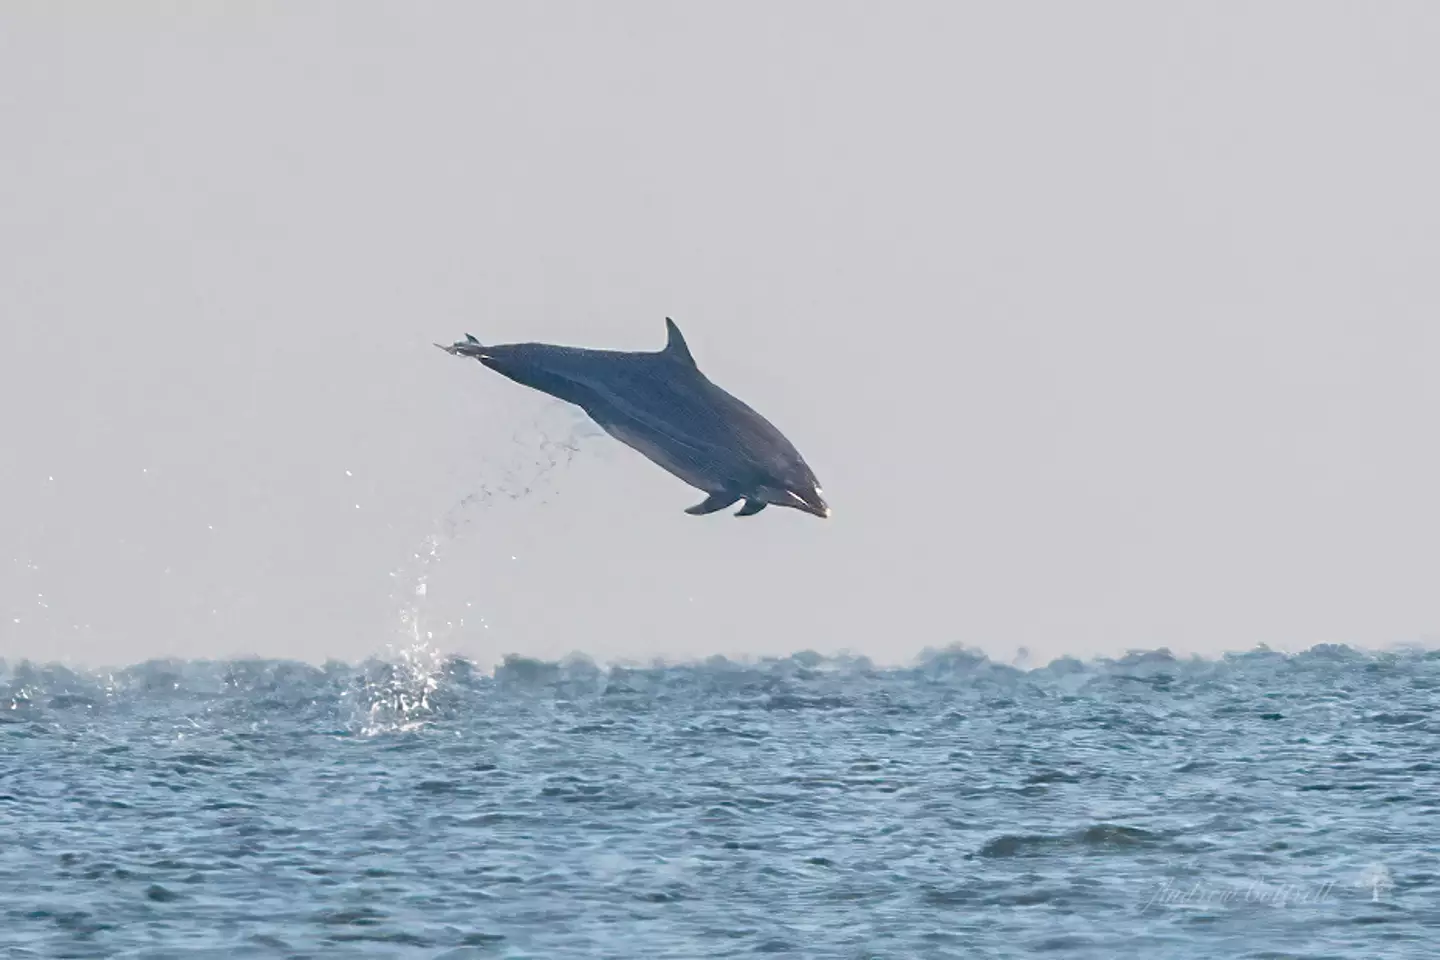 Some of the leaping dolphins made it as high as three metres out of the water.